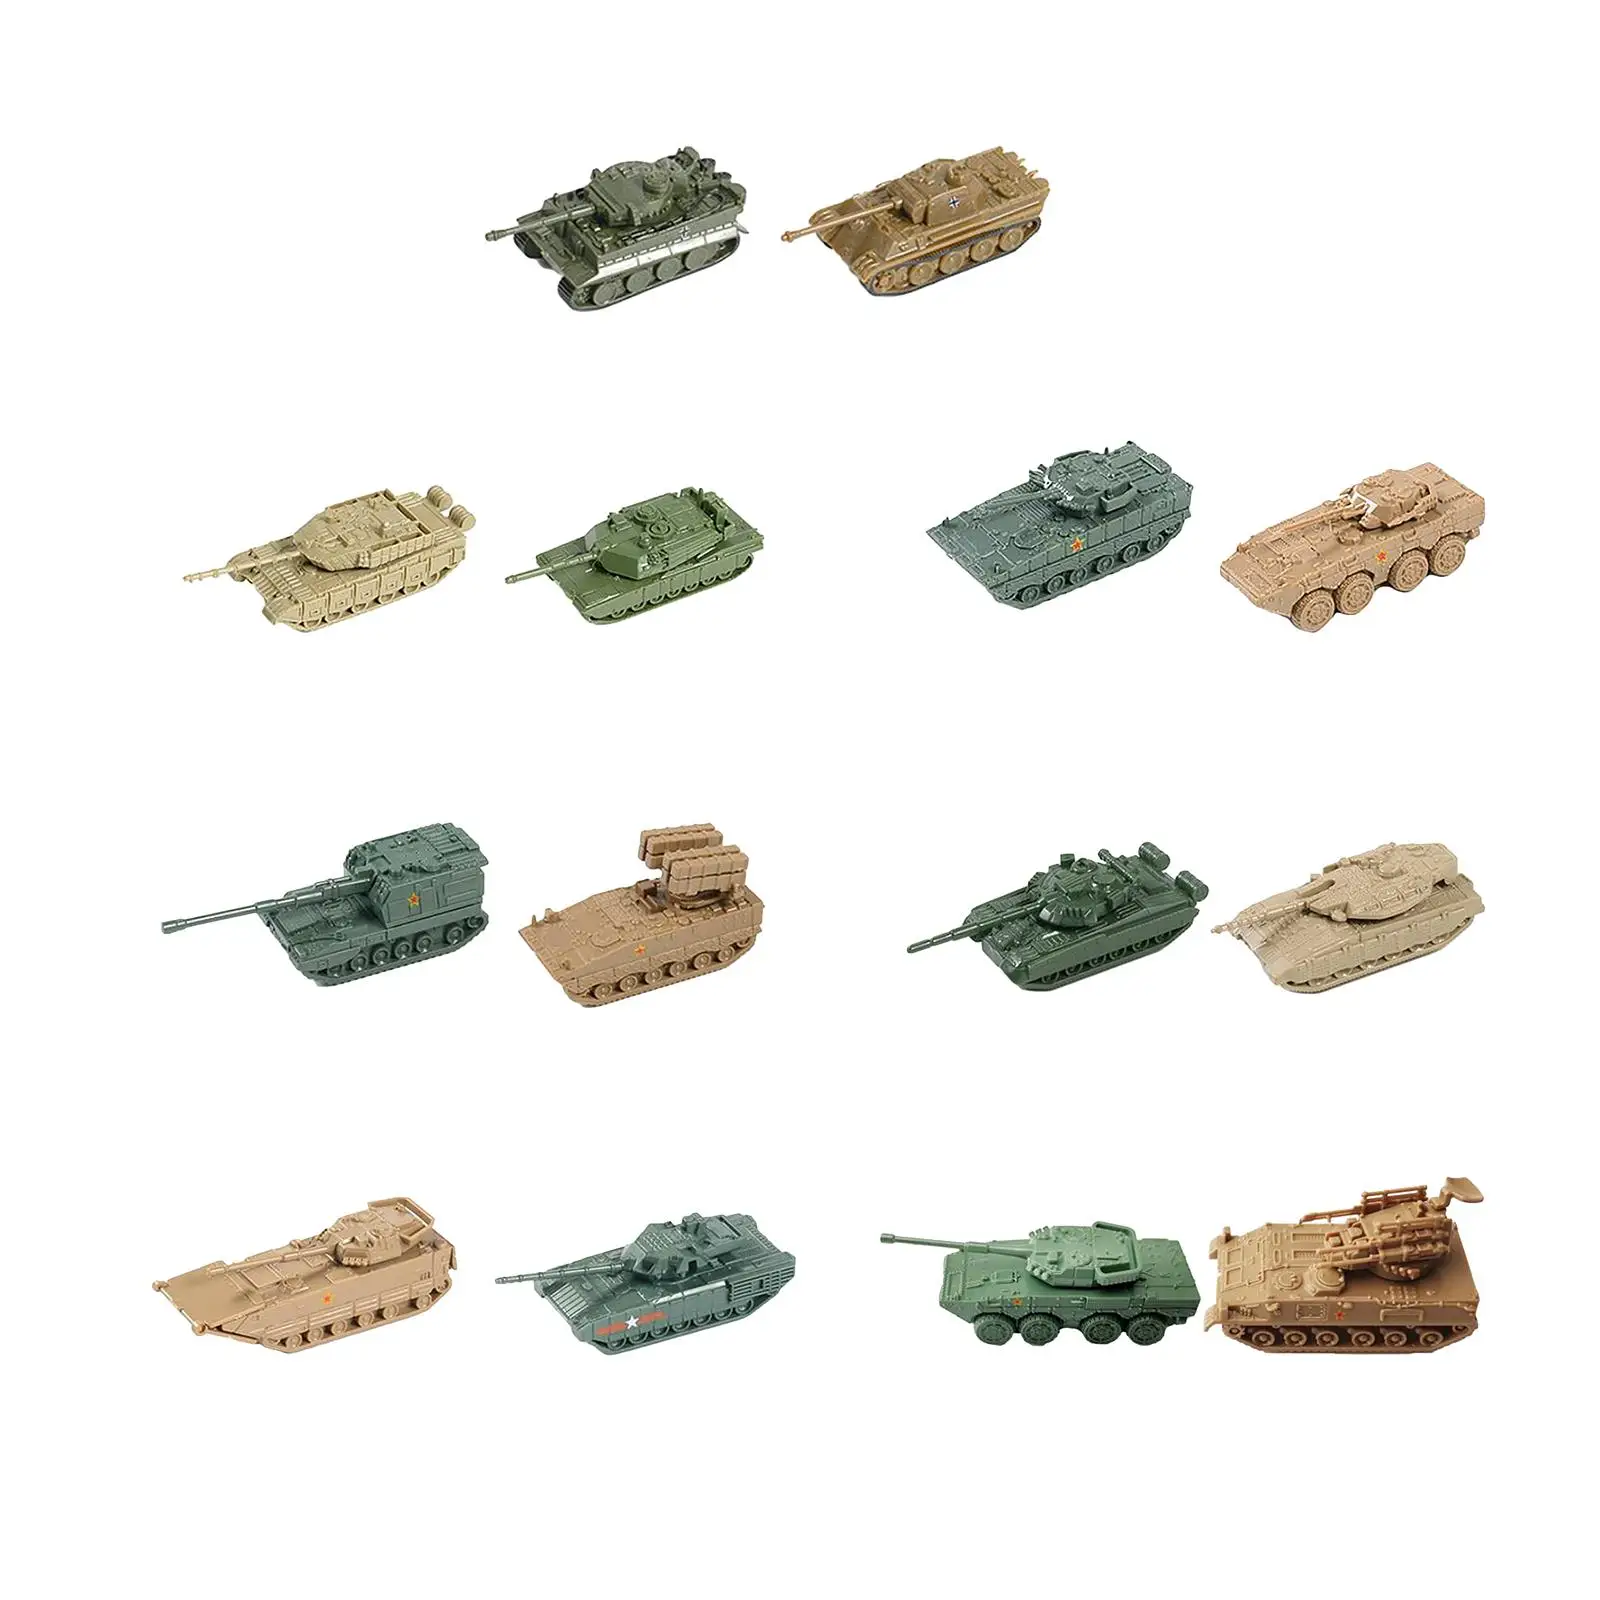 2 Pieces 1:144 Scale Armored Tank Toy Tank Model Puzzle Tracked Crawler Chariot for Table Scene